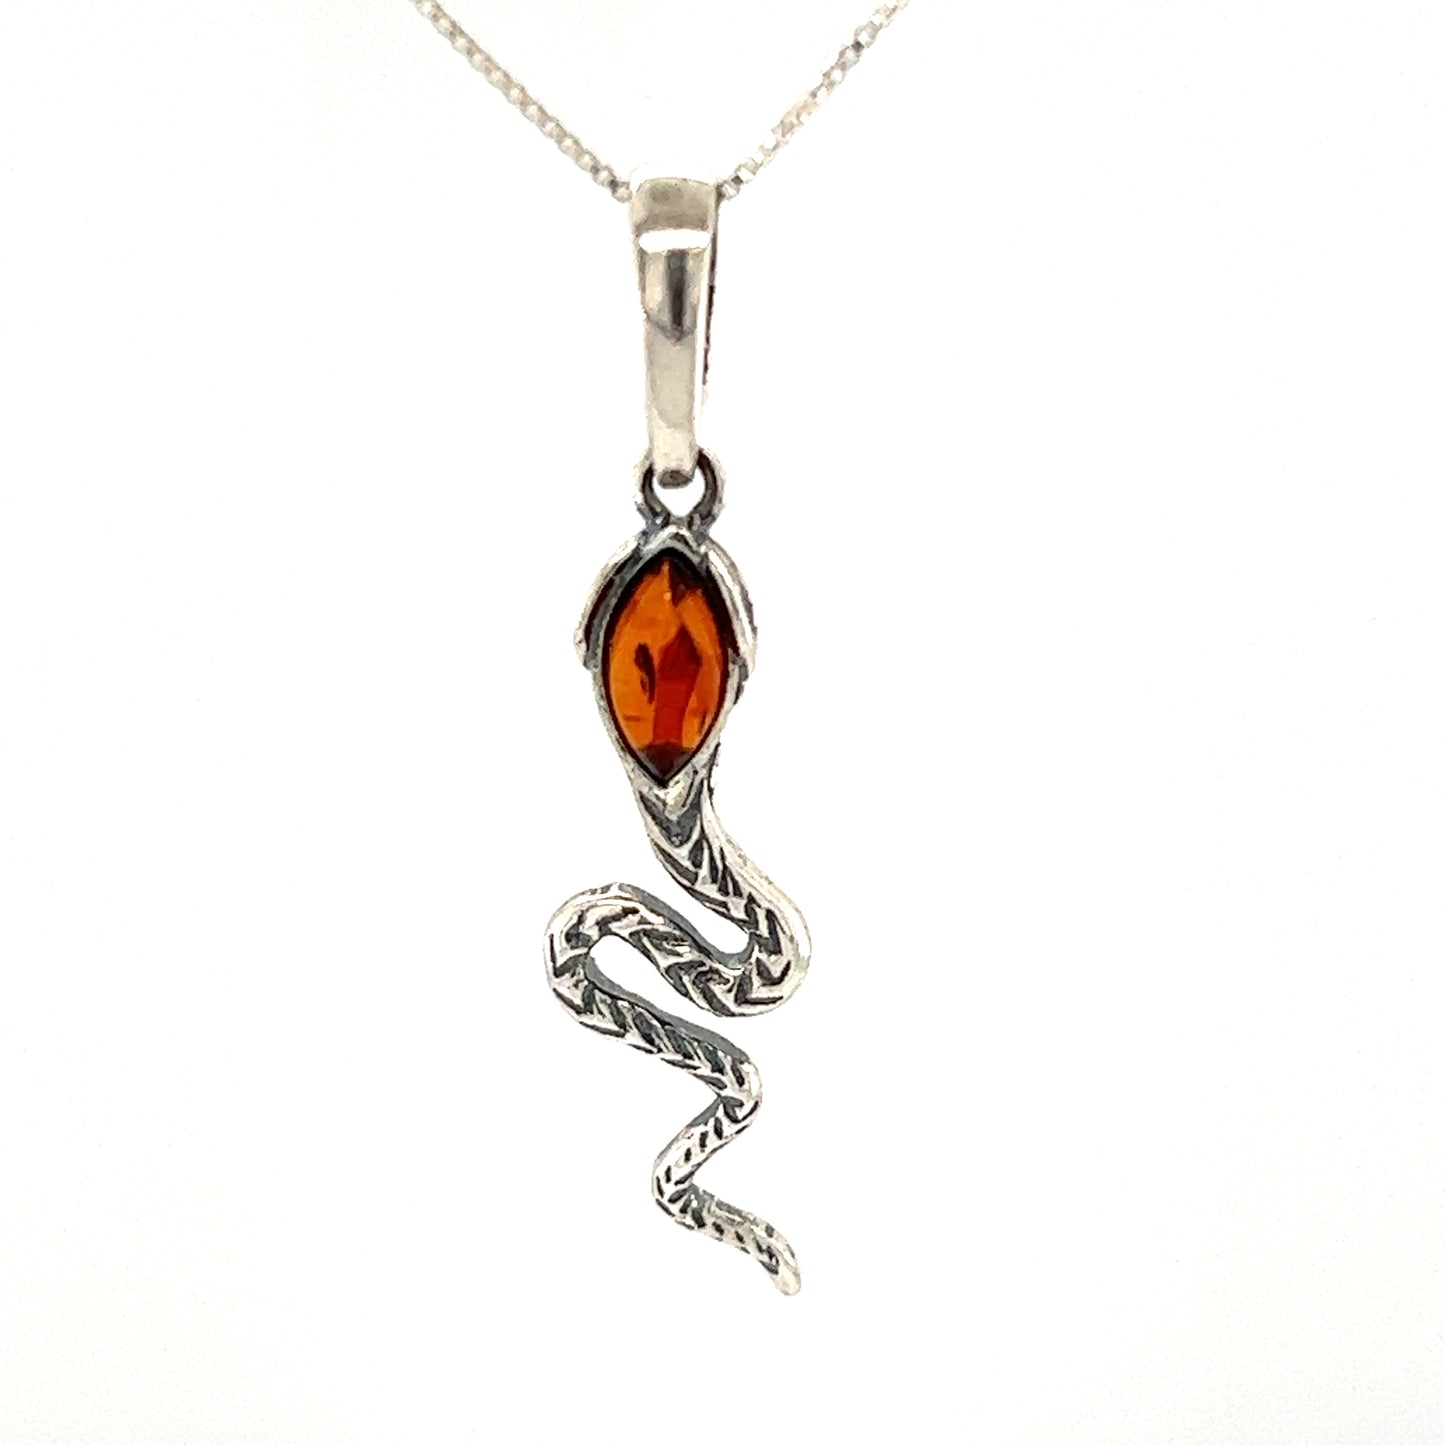 An Alluring Amber Snake Pendant made by Super Silver, featuring an orange stone.